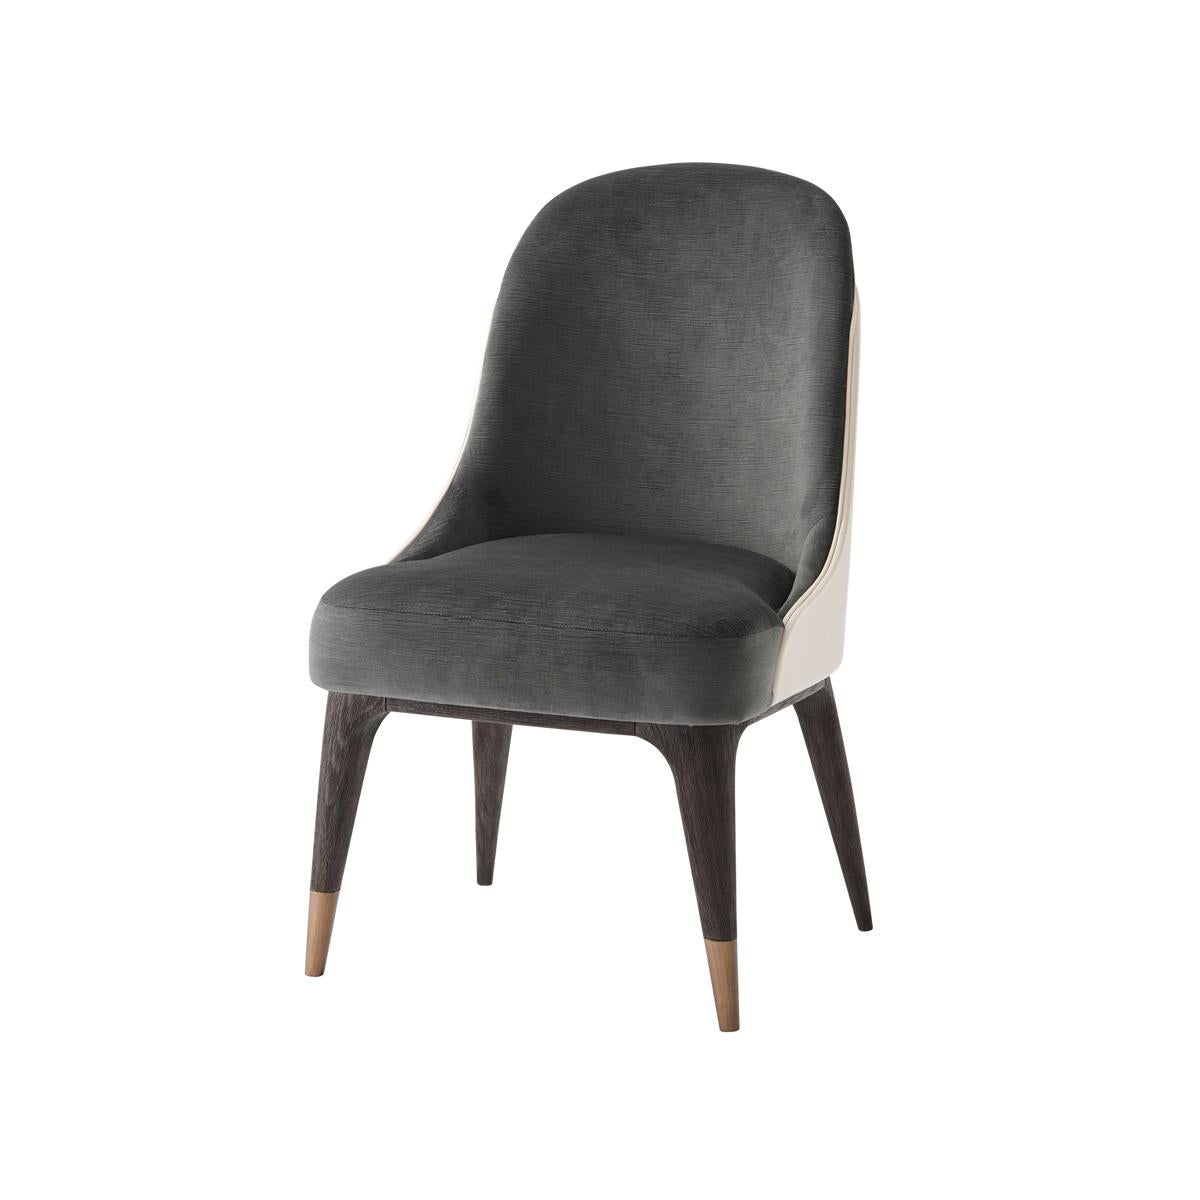 With a leather wrapped and tailored back, upholstered back and seat, on solid oak legs in a 'cigar club' finish. Legs capped with bronze finish metal foot.
Dimensions: 21.25